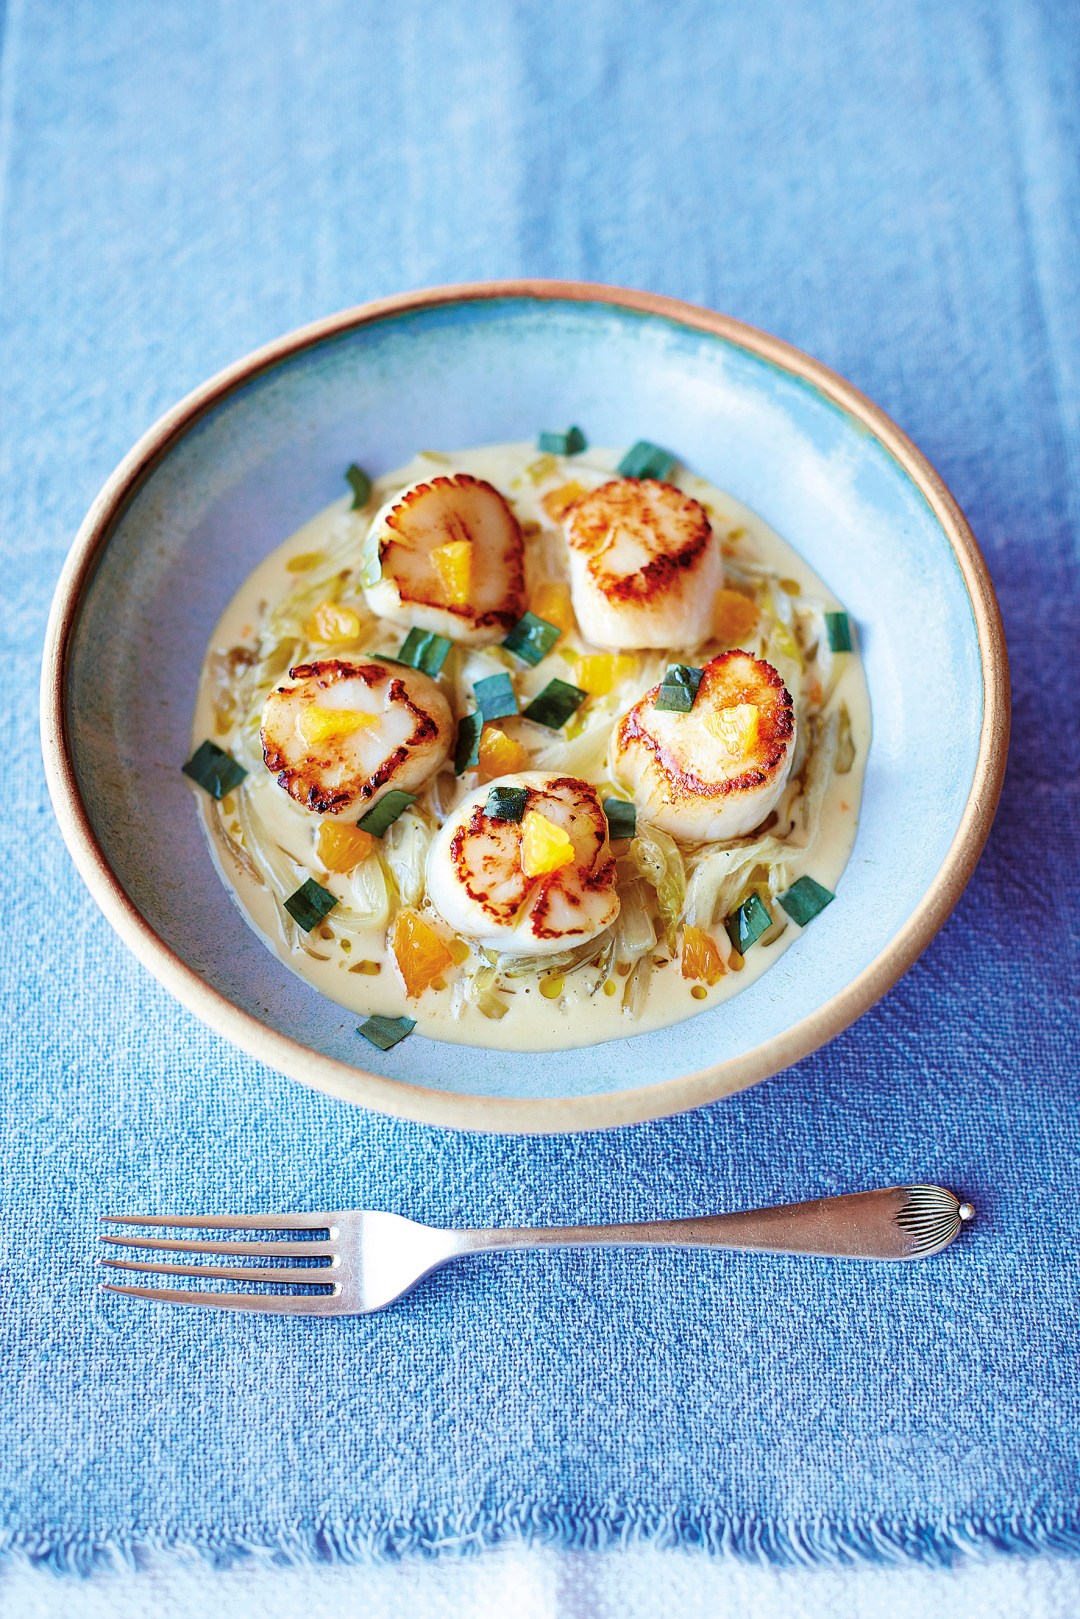 Pan-fried scallops, creamed chicory, orange and tarragon dressing